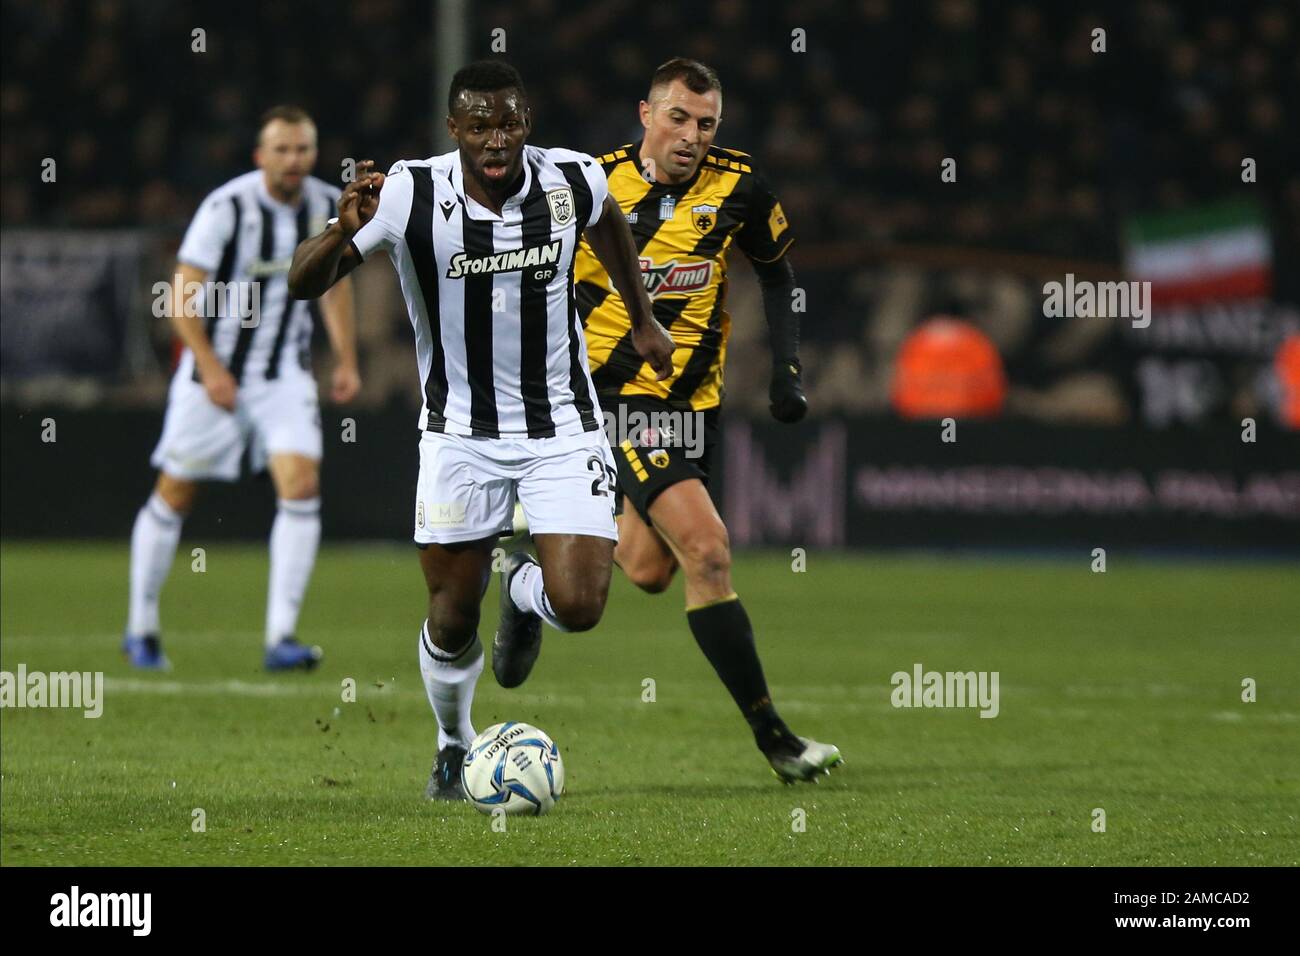 Thessaloniki, Greece. 12th Jan, 2020. PAOK FC player Anderson Esiti (L)  runs with the ball. Classic derby for the Greek Soccer Superleague between  PAOK FC and AEK FC in Toumba Stadium. Credit: